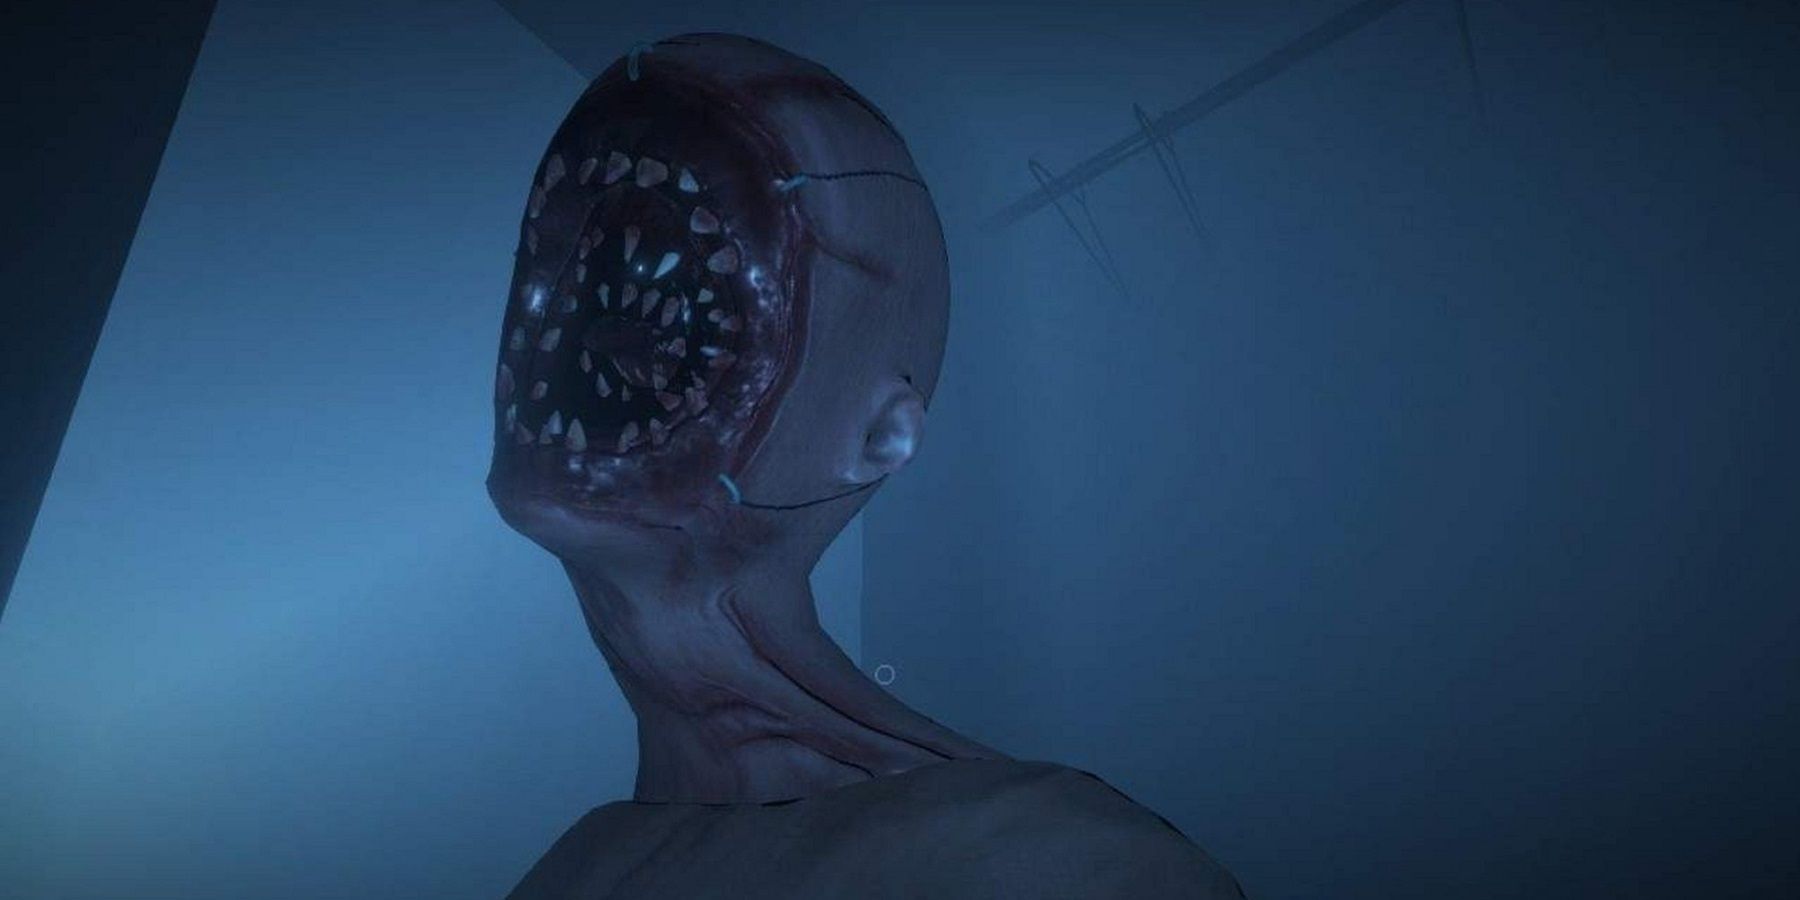 Screenshot from Phasmophobia showing a close-up of a terrifying creature with vast amounts of teeth instead of a face.